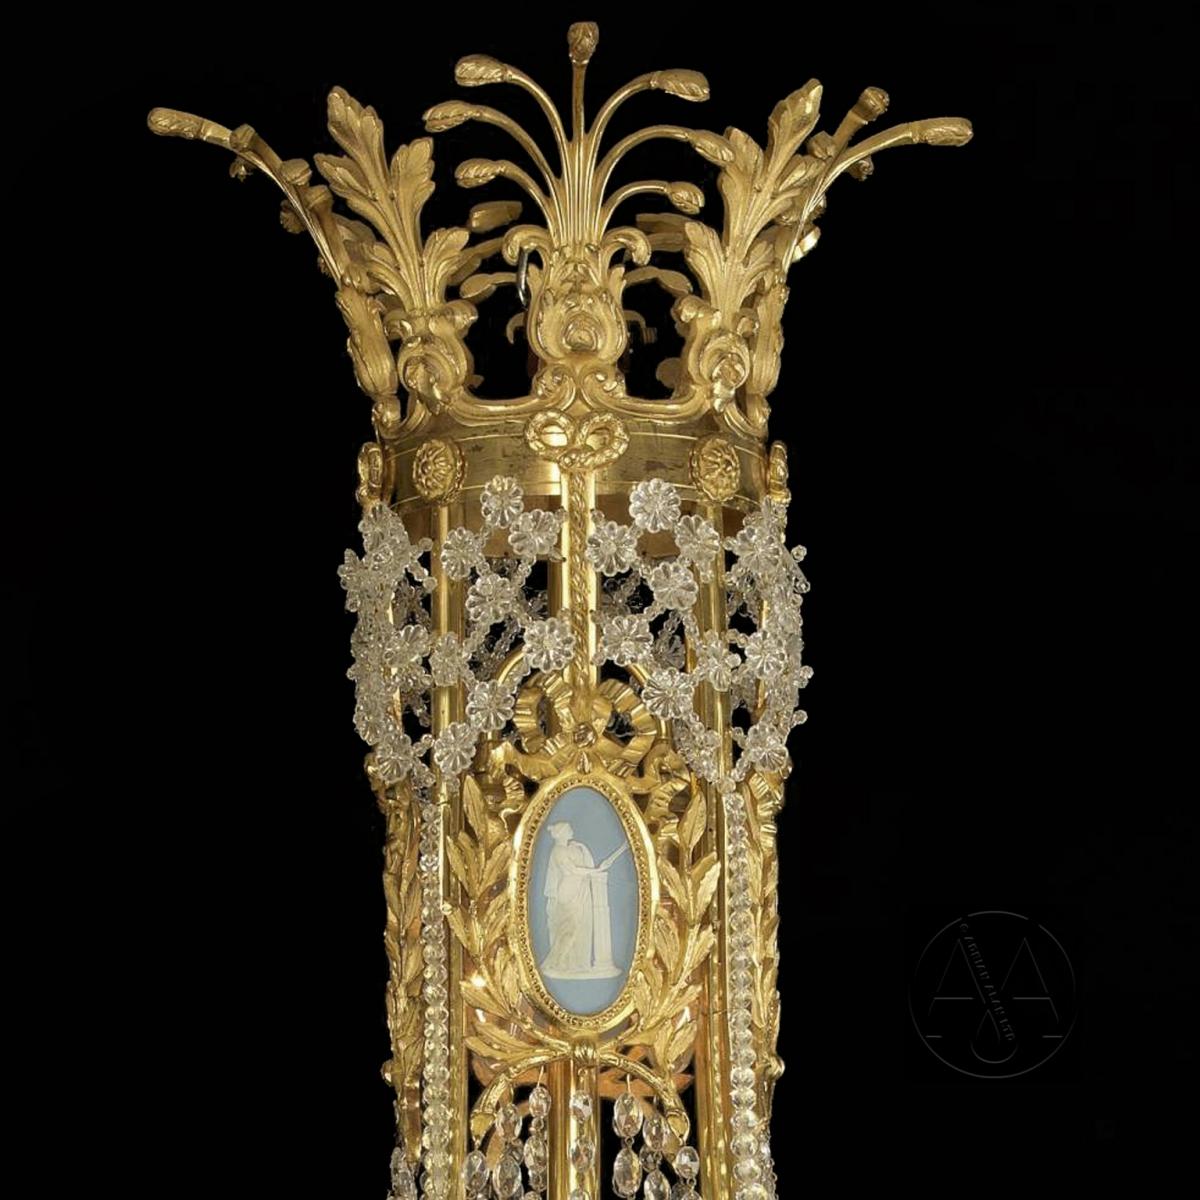 Louis XVI Style Cut-Glass and Gilt-Bronze Mounted Chandelier